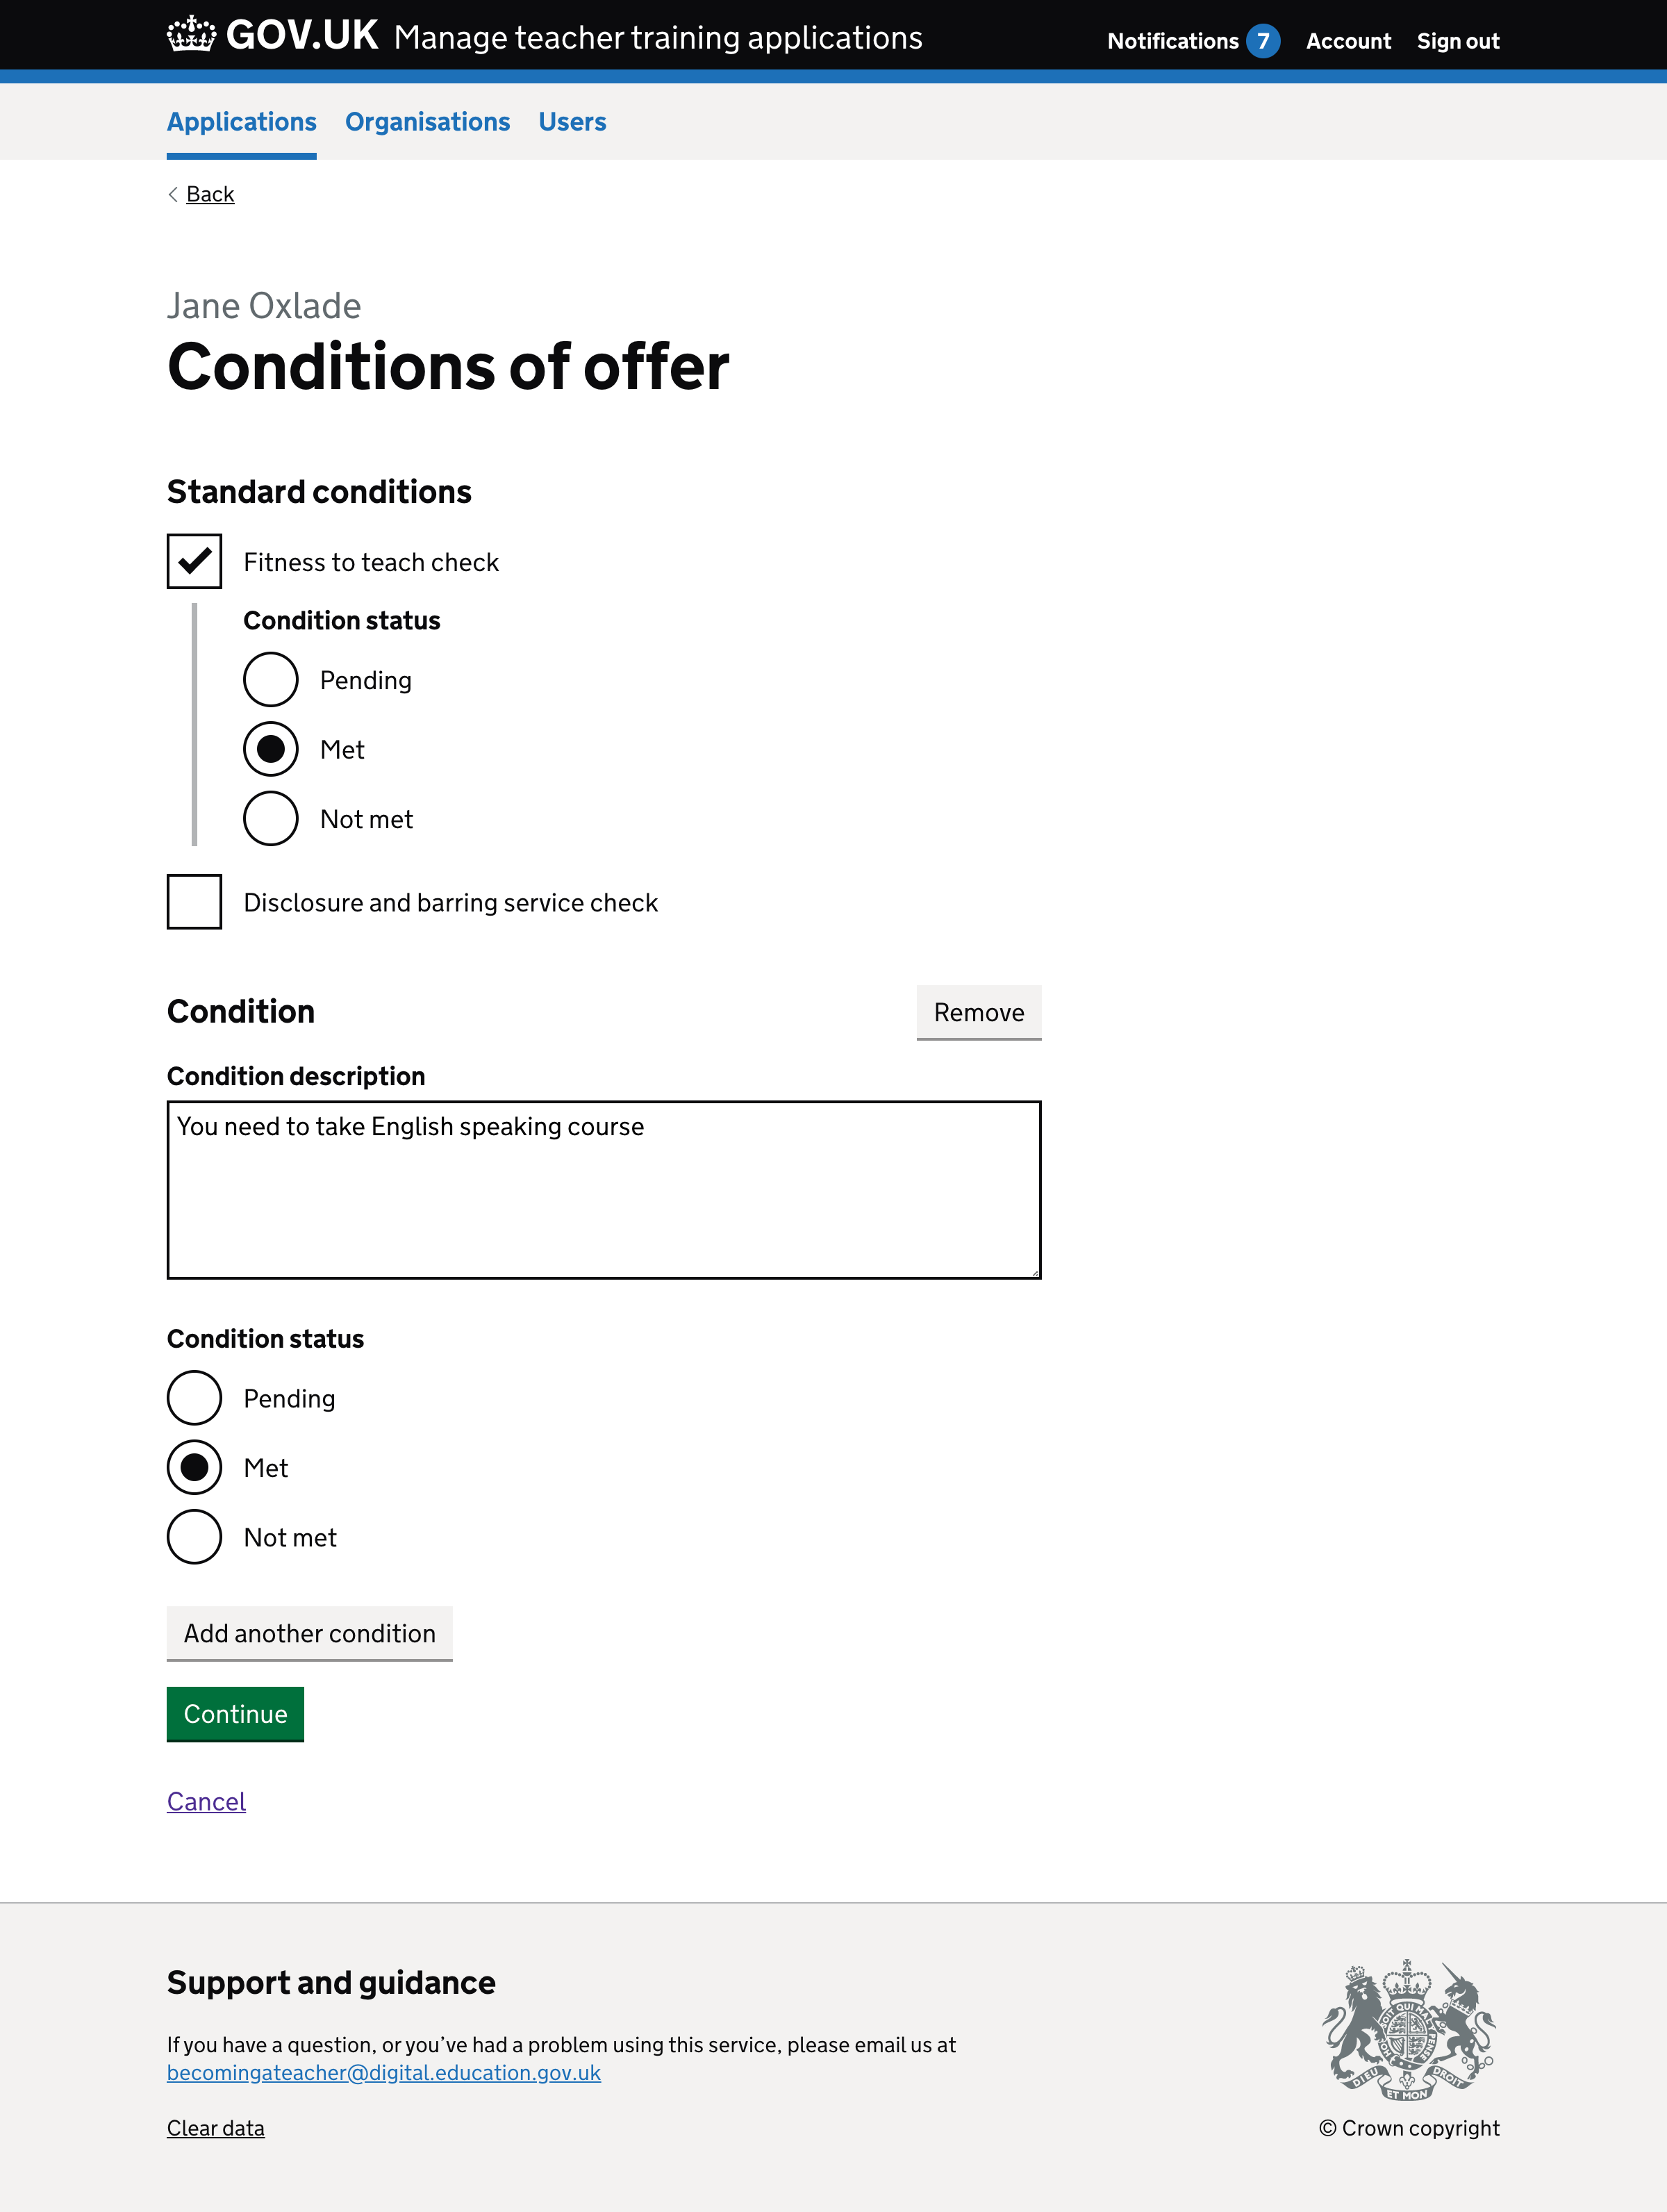 Screenshot of ‘Conditions of offer’ form.